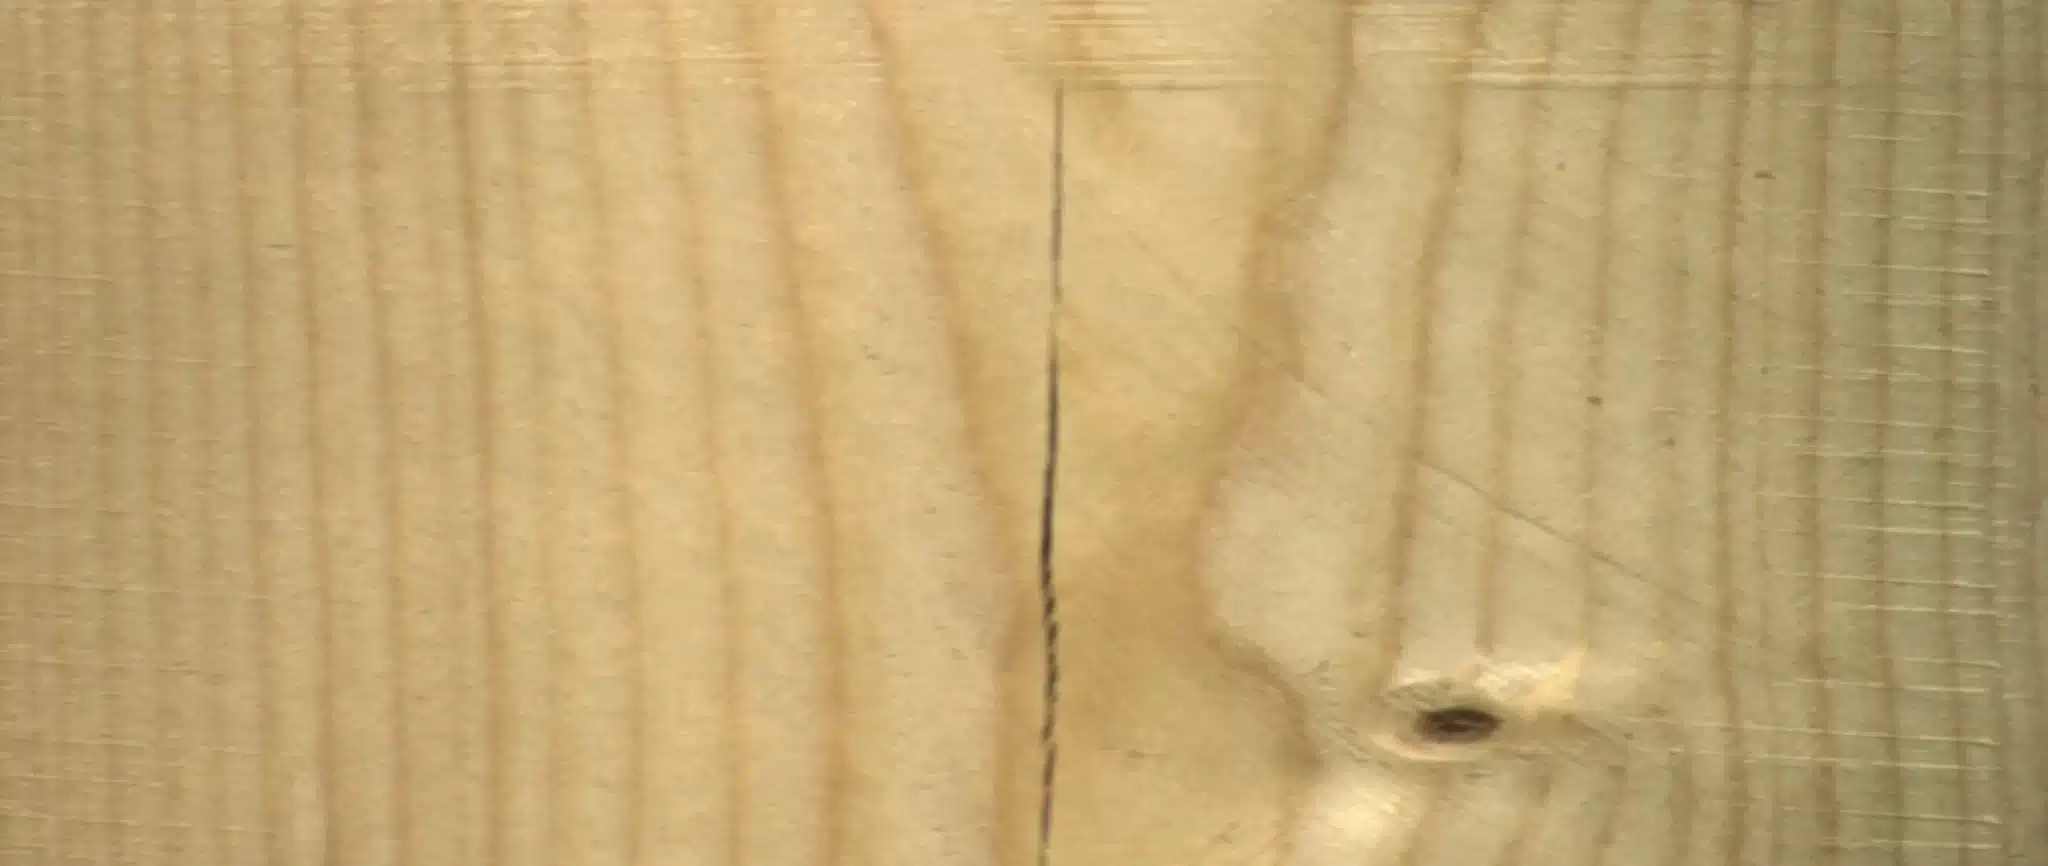 Cracked wood inspection with easyODM